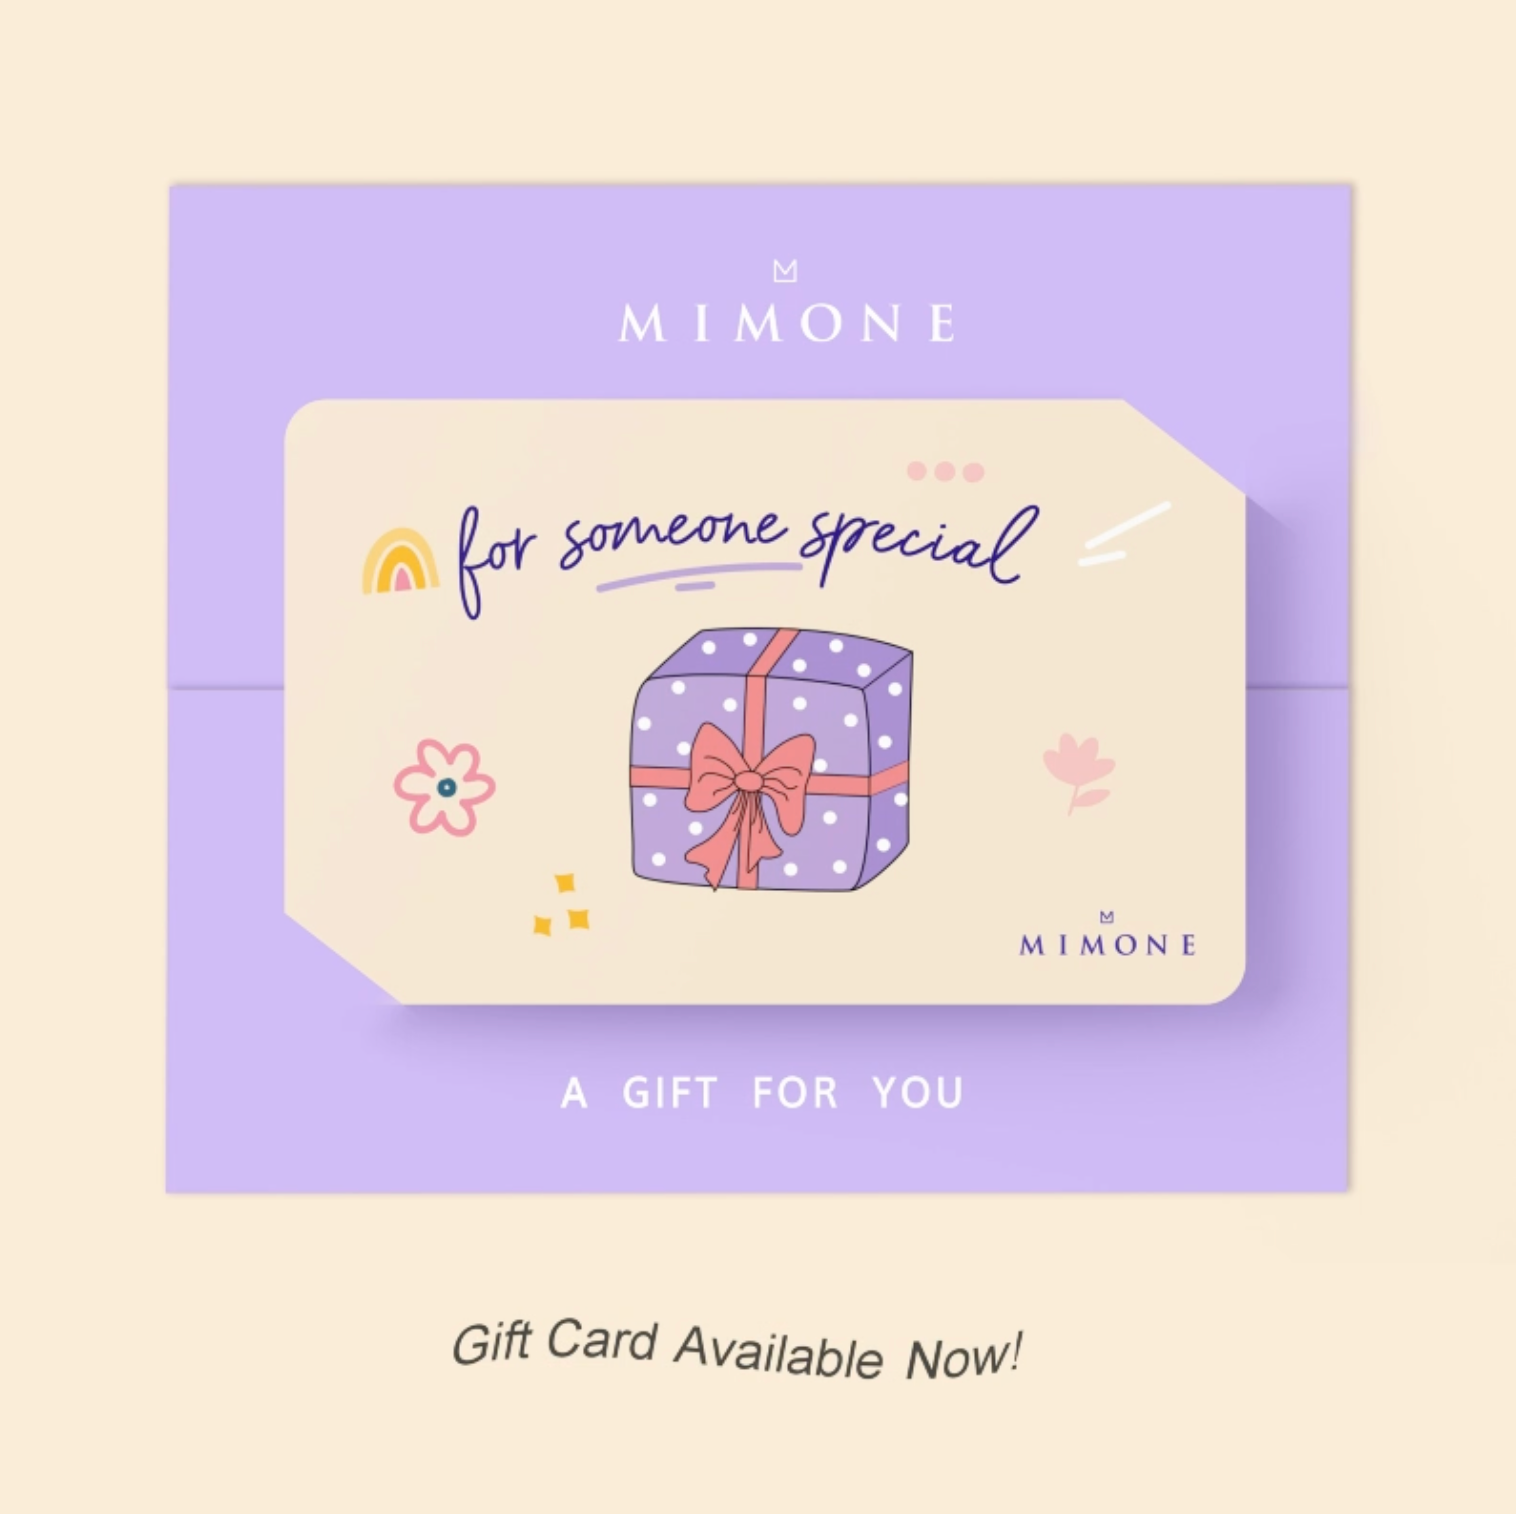 Physical Gift Card (In Store Use) Design D: For Someone Special